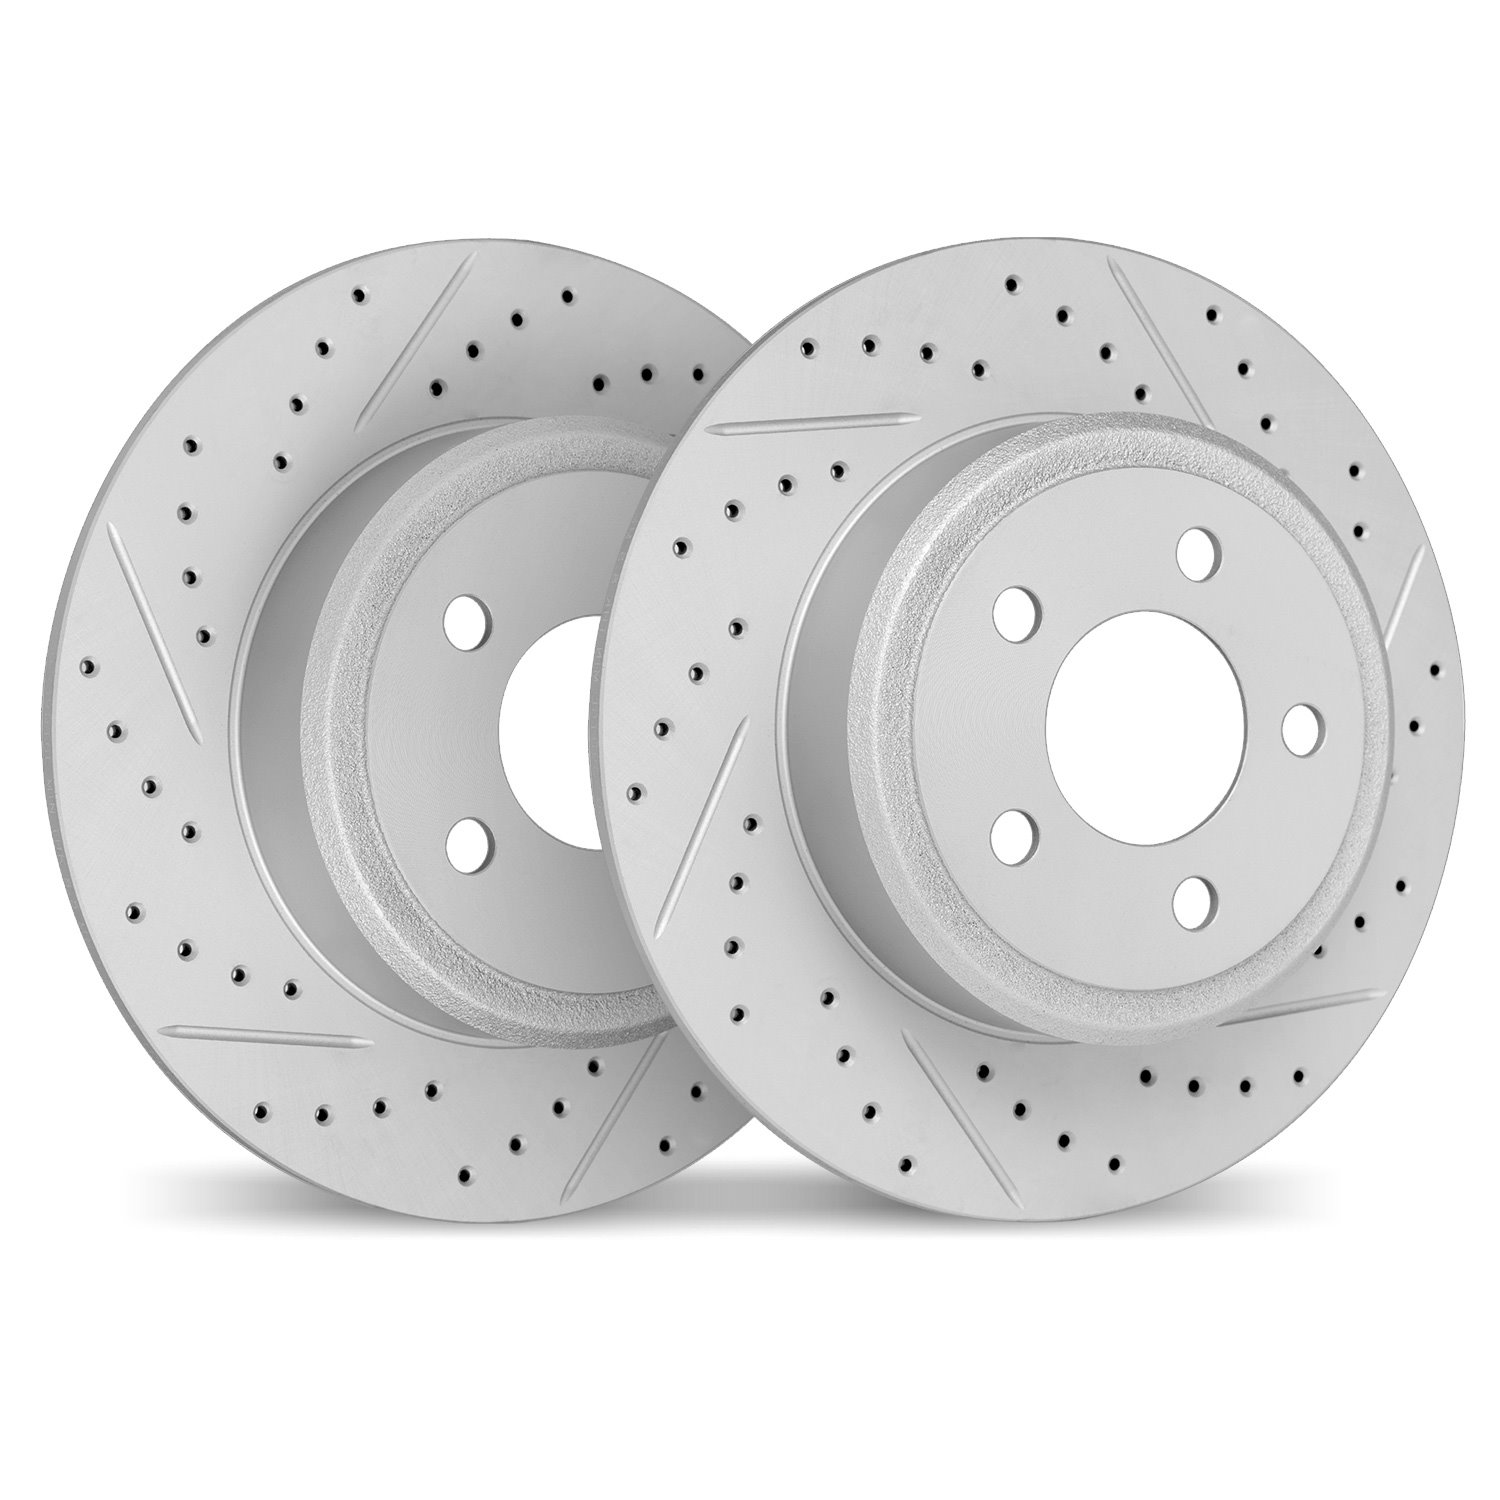 2002-54142 Geoperformance Drilled/Slotted Brake Rotors, 2003-2005 Ford/Lincoln/Mercury/Mazda, Position: Rear